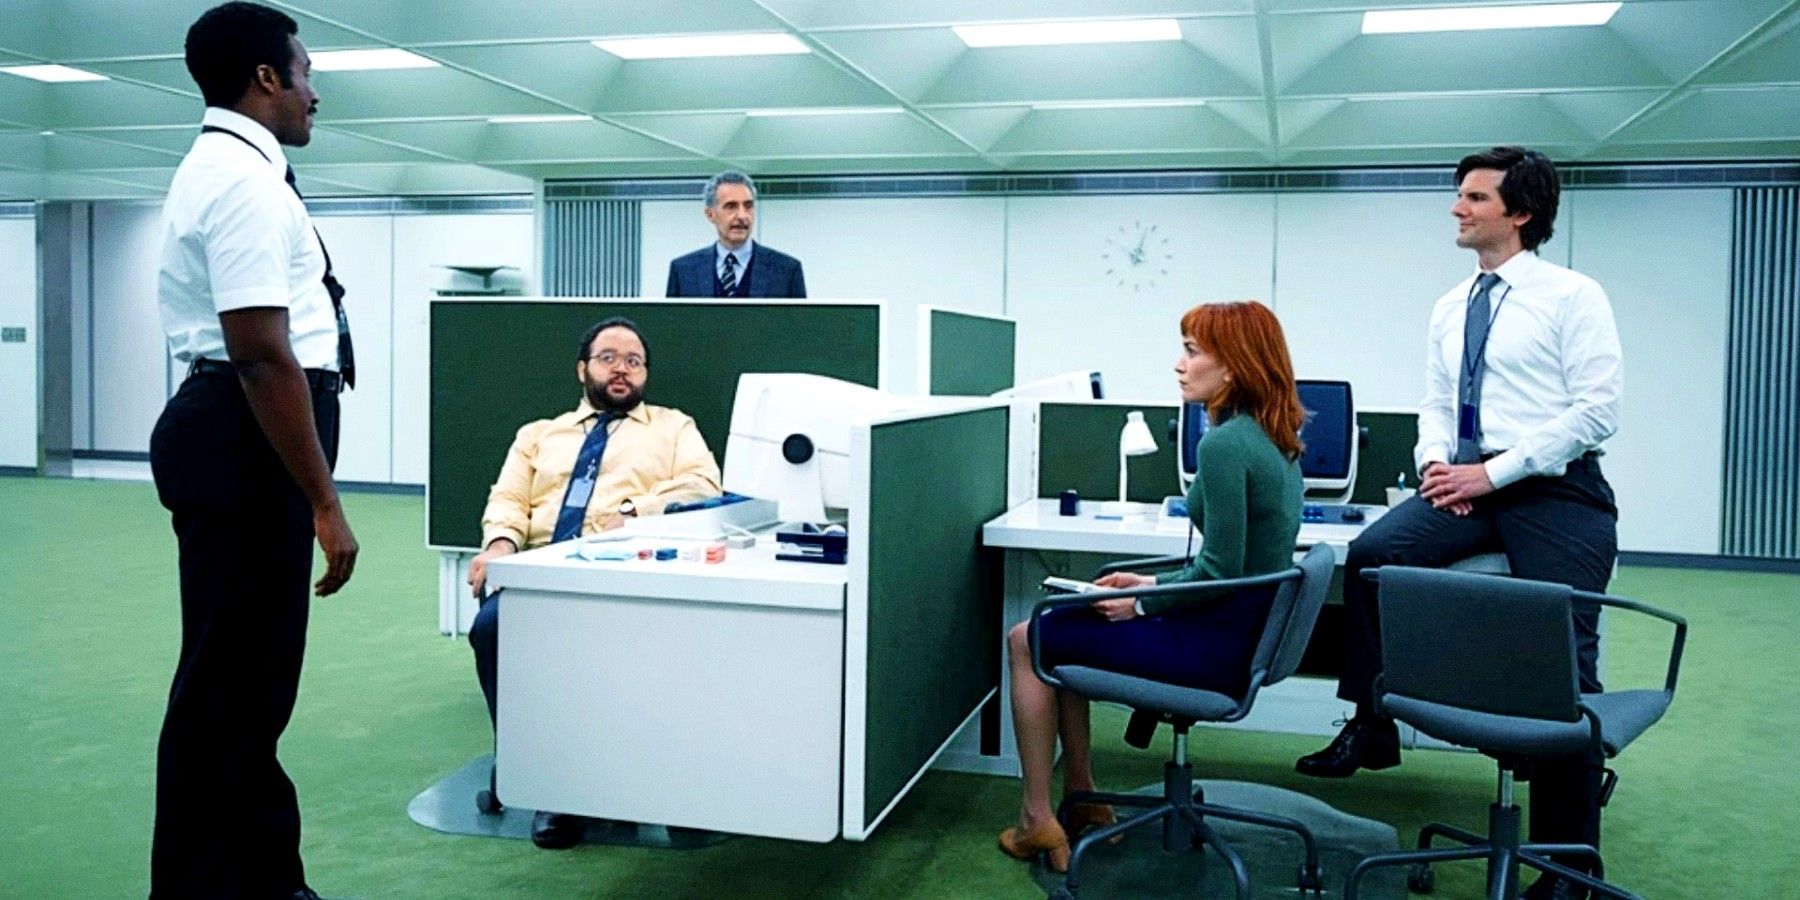 The cast of Severance sitting in an office setting.